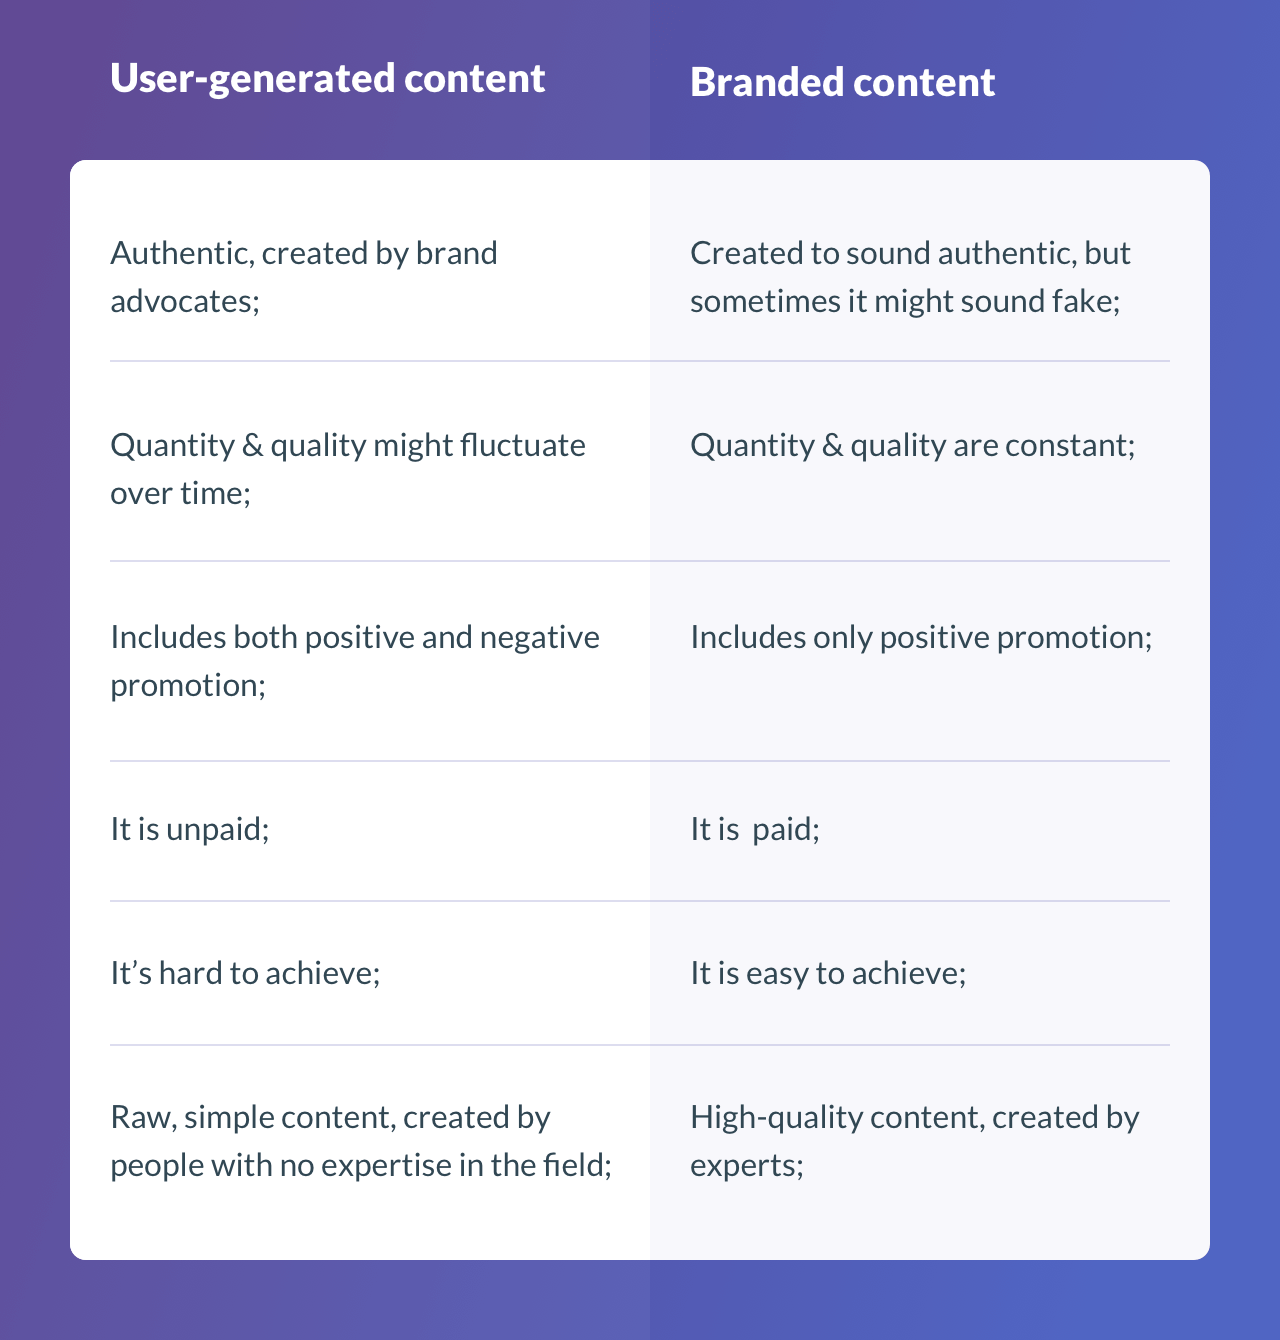 UGC vs Branded content differences